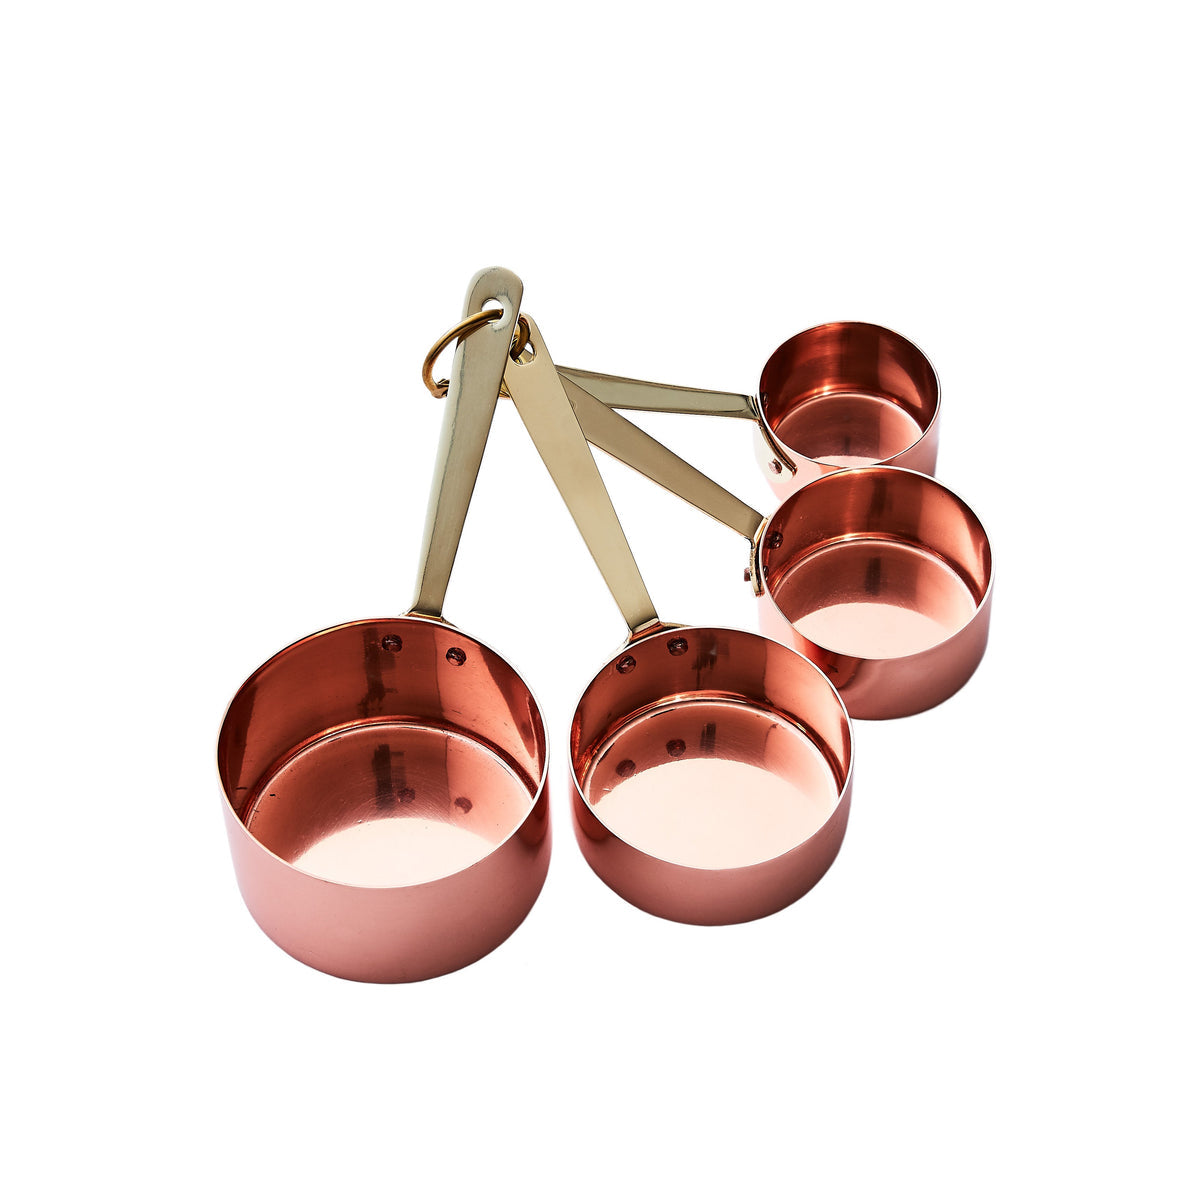 Coppermill Kitchen | Vintage Inspired Measuring Cups | Authentic Copper &  Brass | Hand-Engraved Cross & Bow Pattern | Set of 4